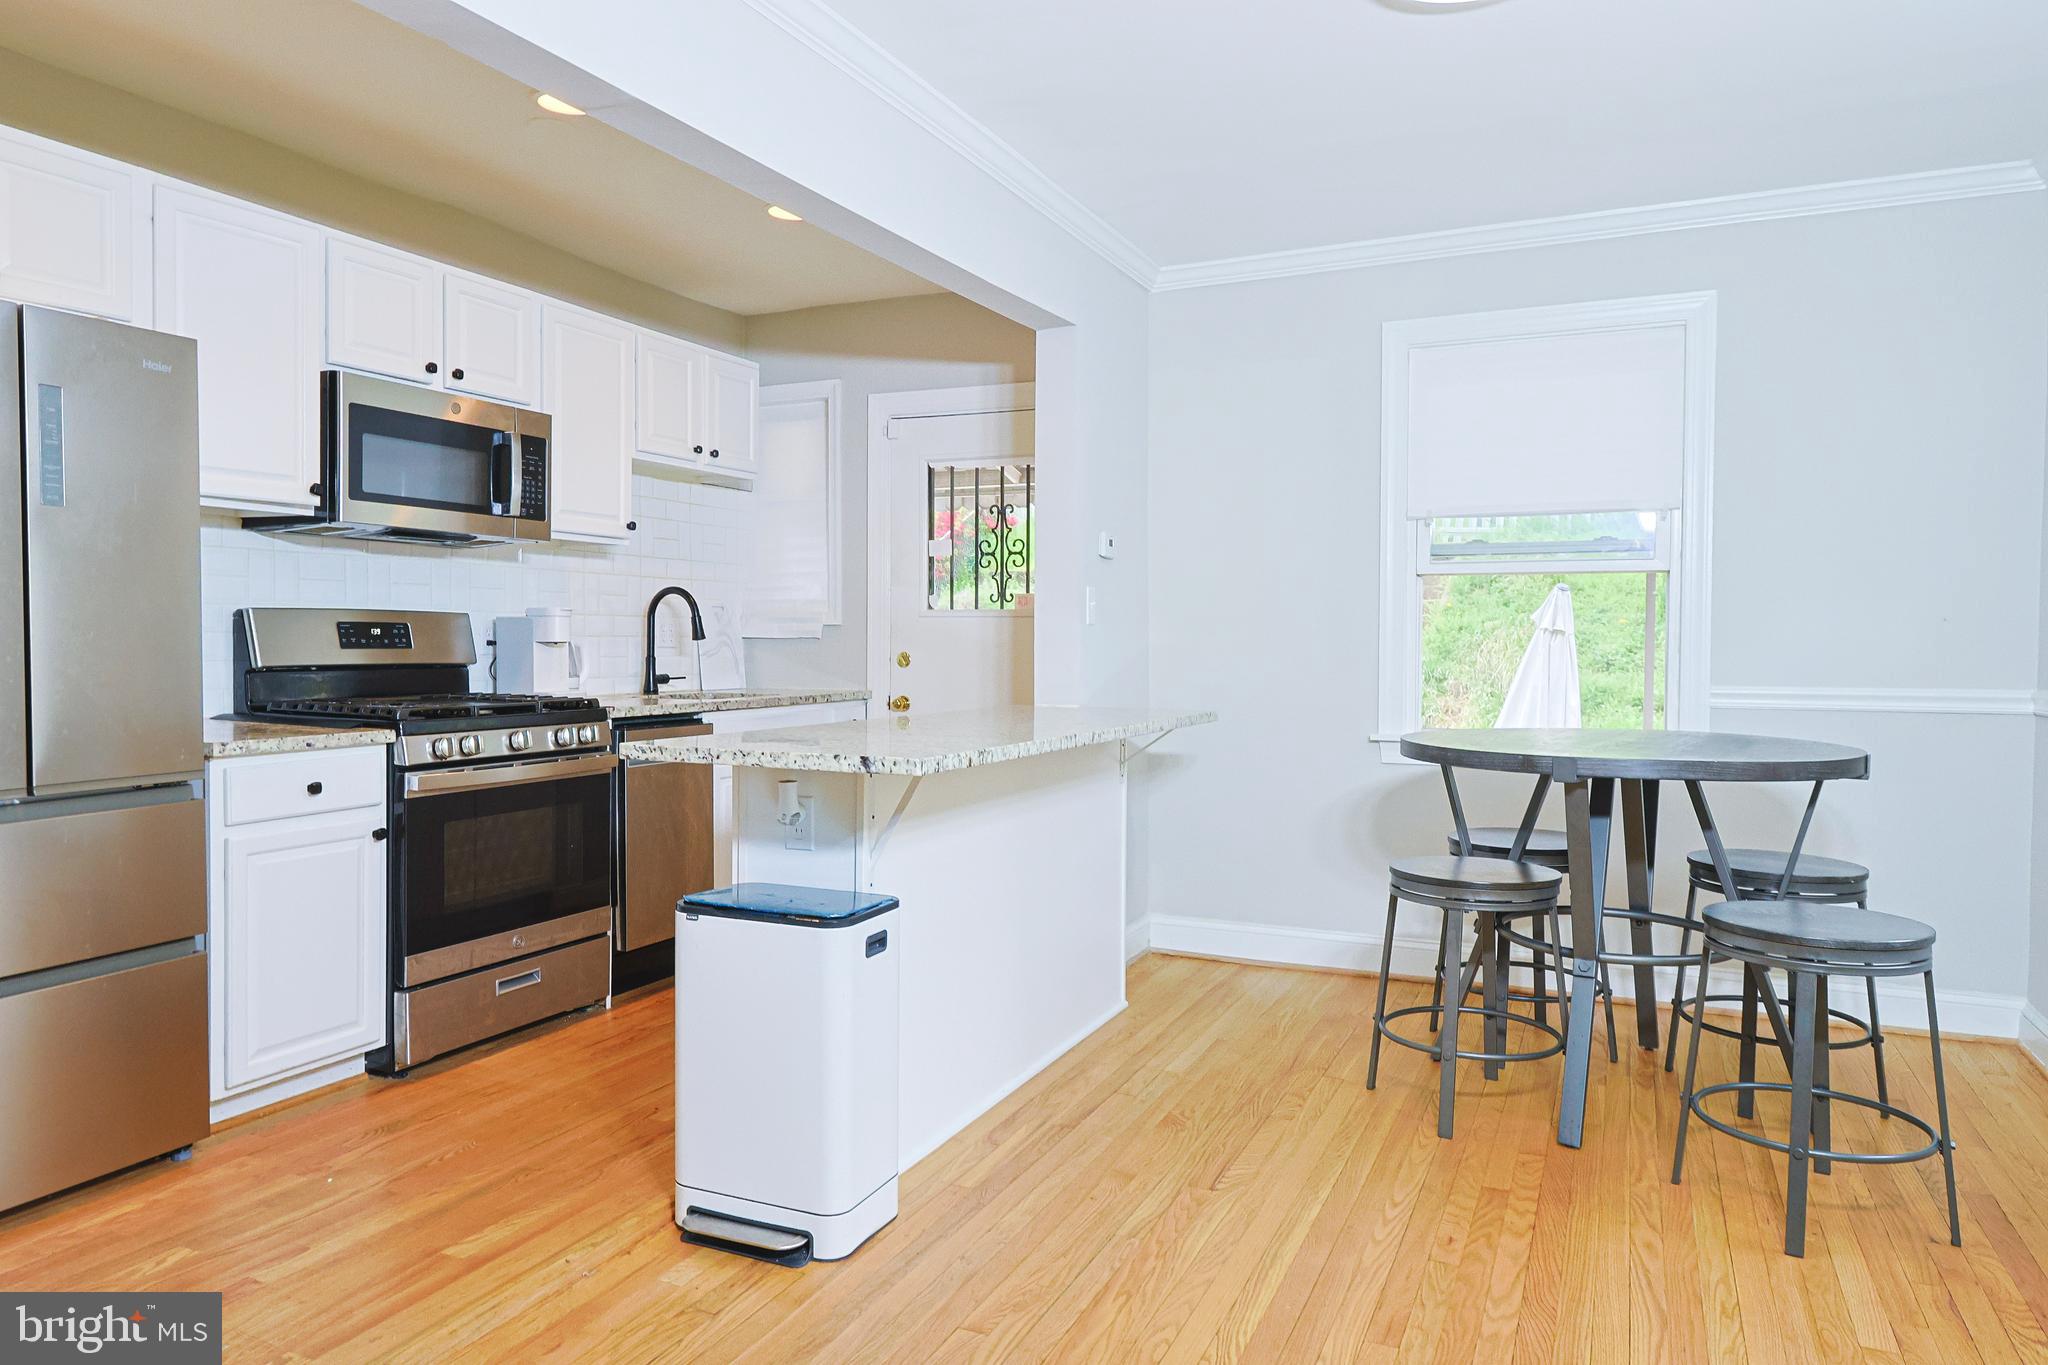 a kitchen with stainless steel appliances a stove a sink white cabinets and wooden floor